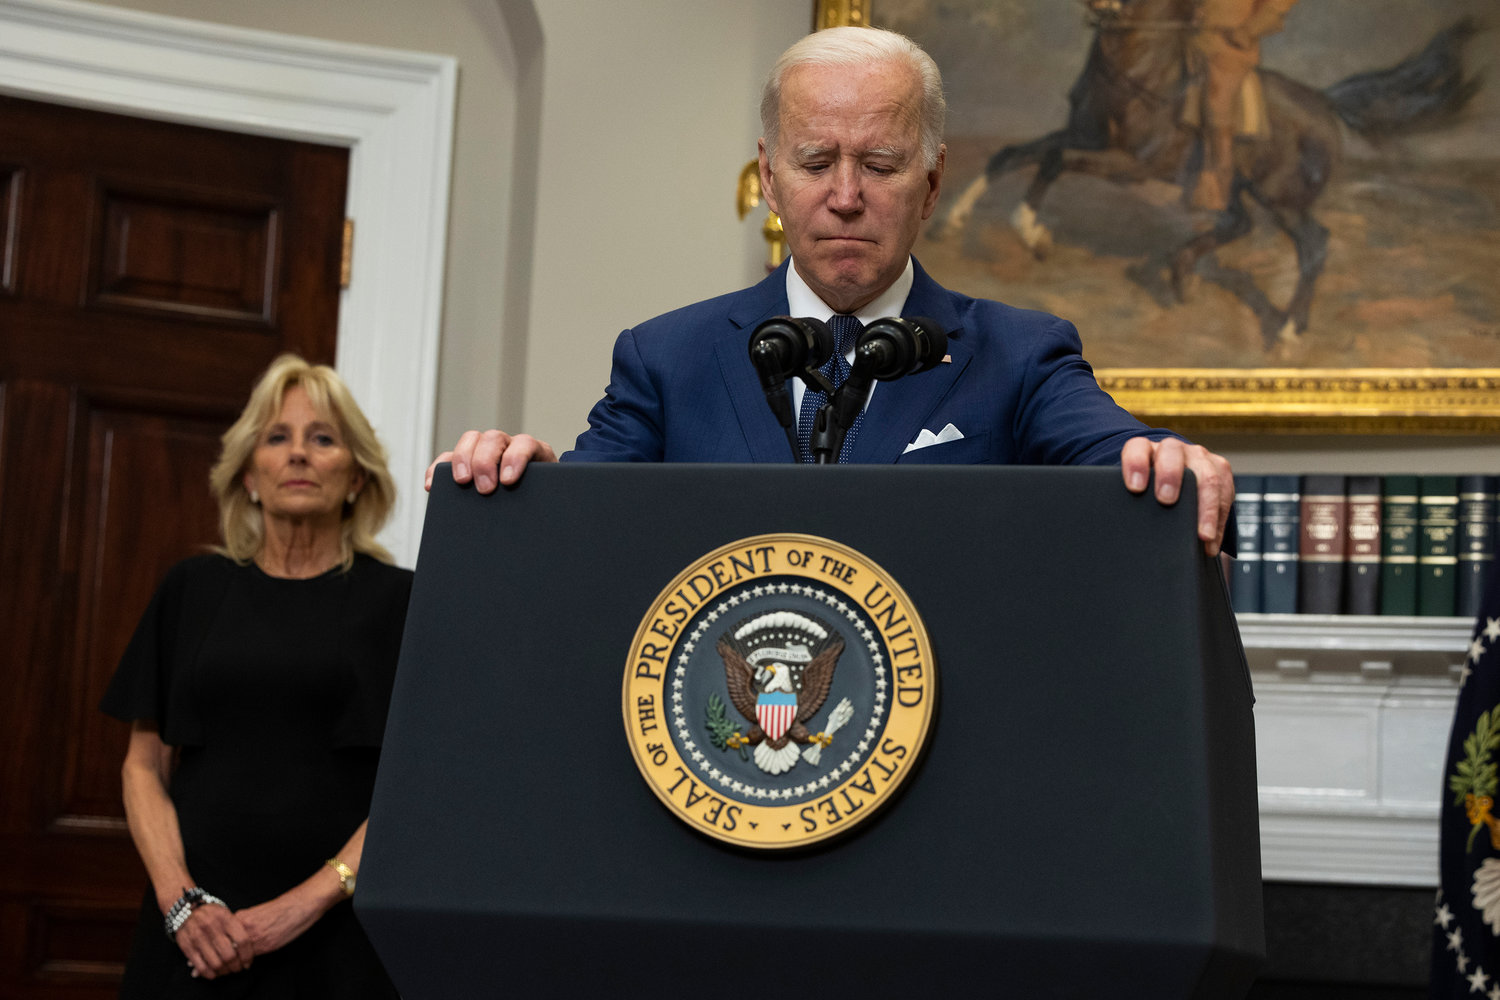 U.S. President Joe Biden delivers remarks from the Roosevelt Room of the White House as first lady Jill Biden looks on concerning the mass shooting at a Texas elementary school on May 24, 2022, in Washington, DC. Eighteen people are dead after a gunman today opened fire at the Robb Elementary School in Uvalde, Texas, according to published reports. (Anna Moneymaker/Getty Images/TNS)